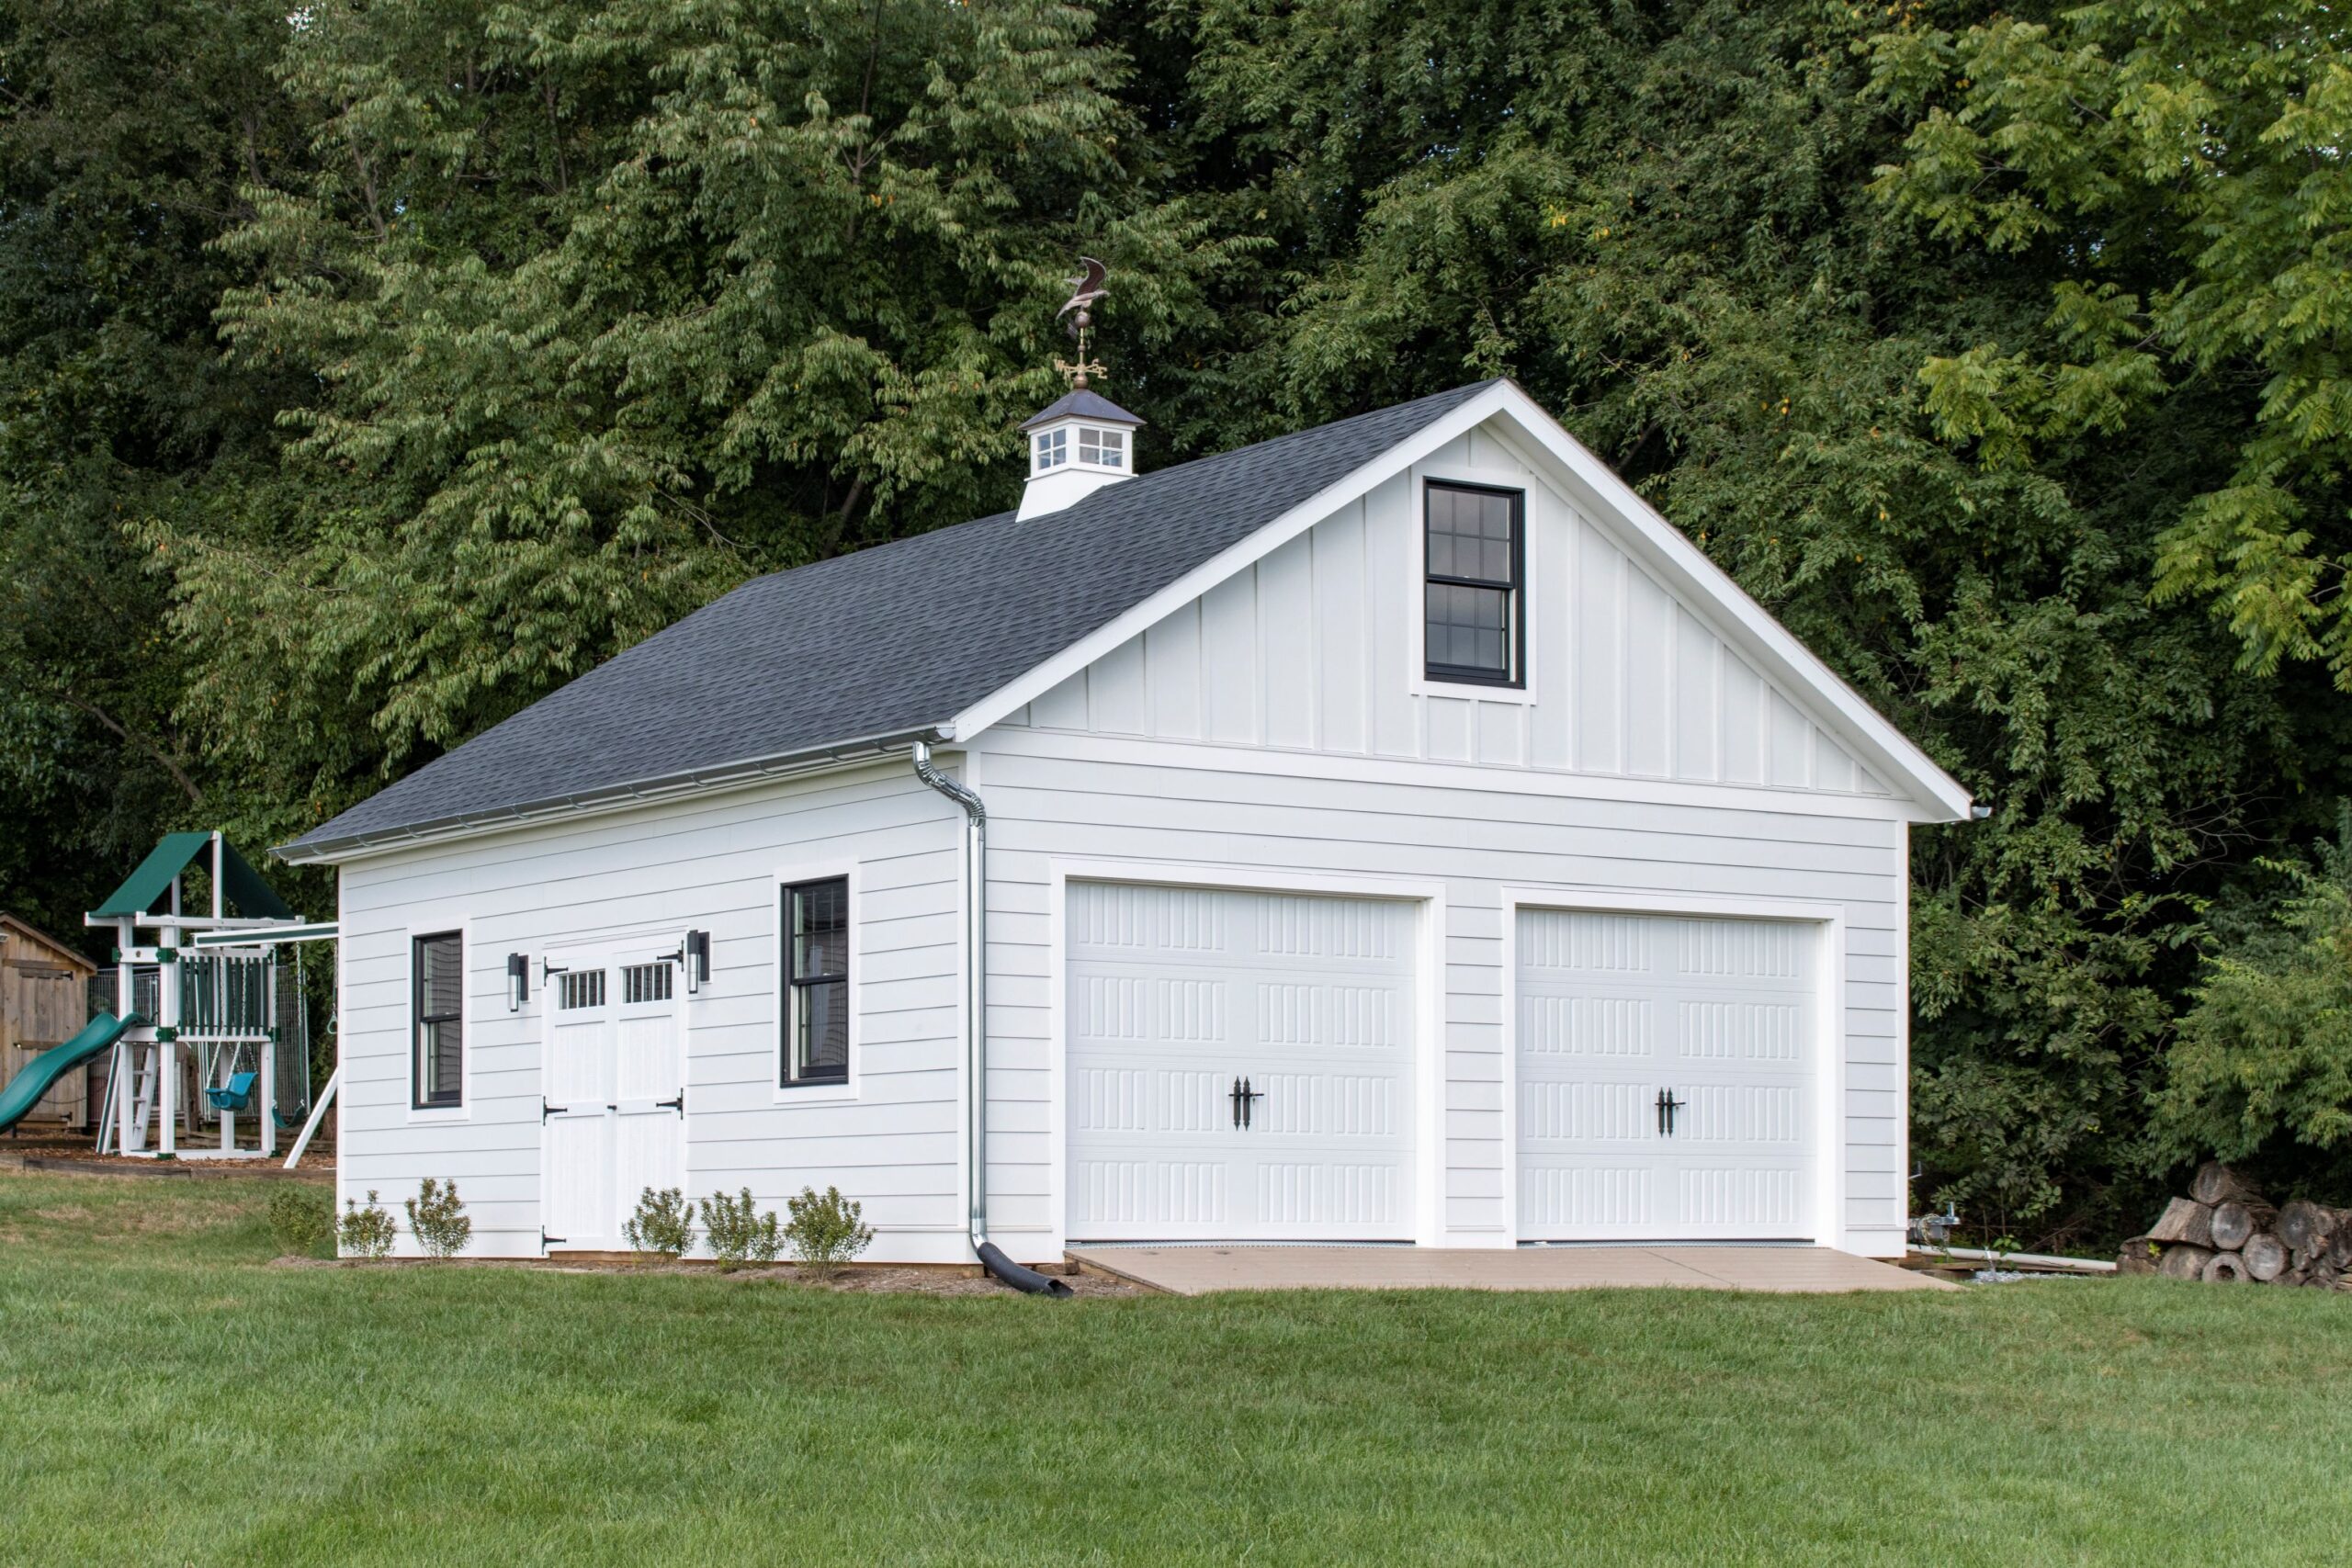 Exterior of a 2-story, 2-car Garden Shed Garage with white siding, gray roofing, and white garage doors.